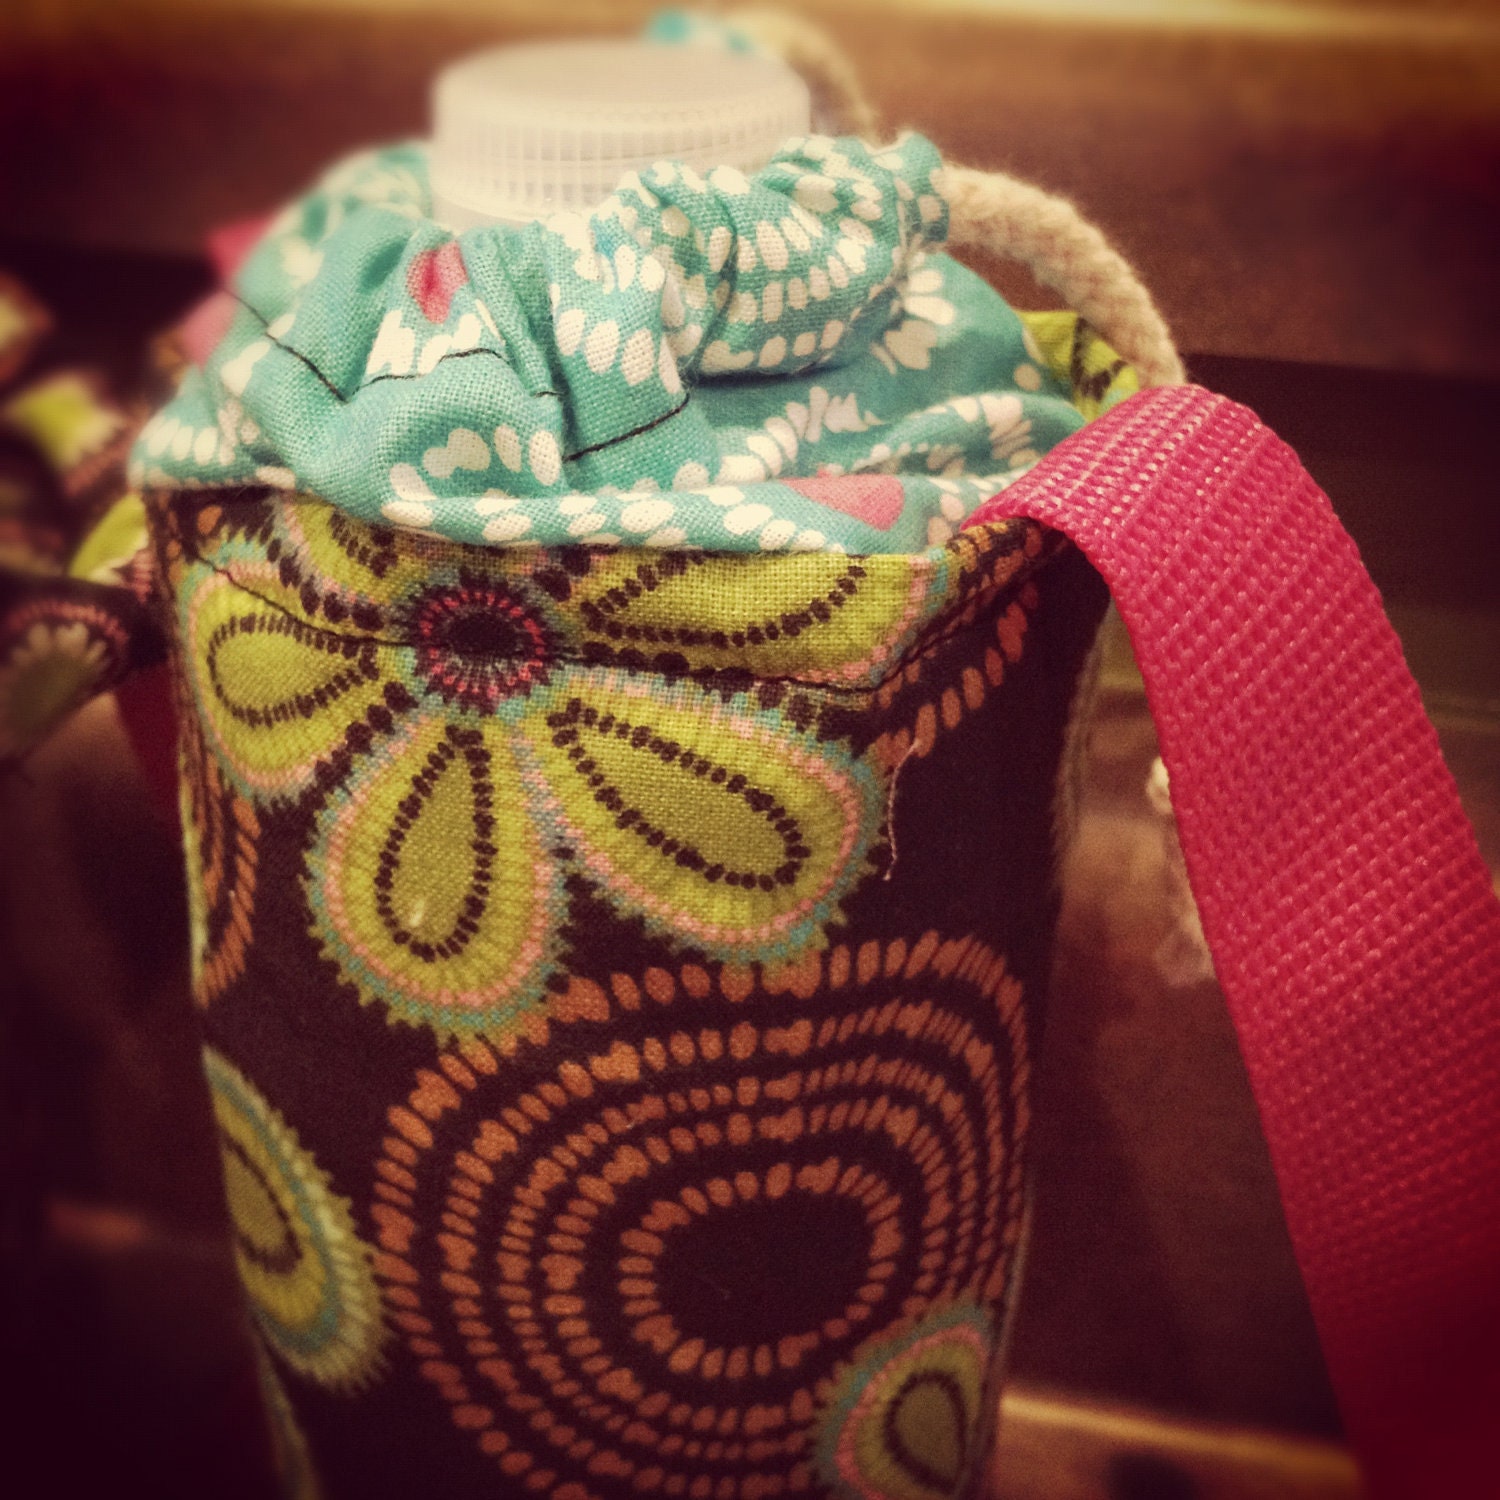 Insulated Water Bottle Carrier-Black and Teal Floral